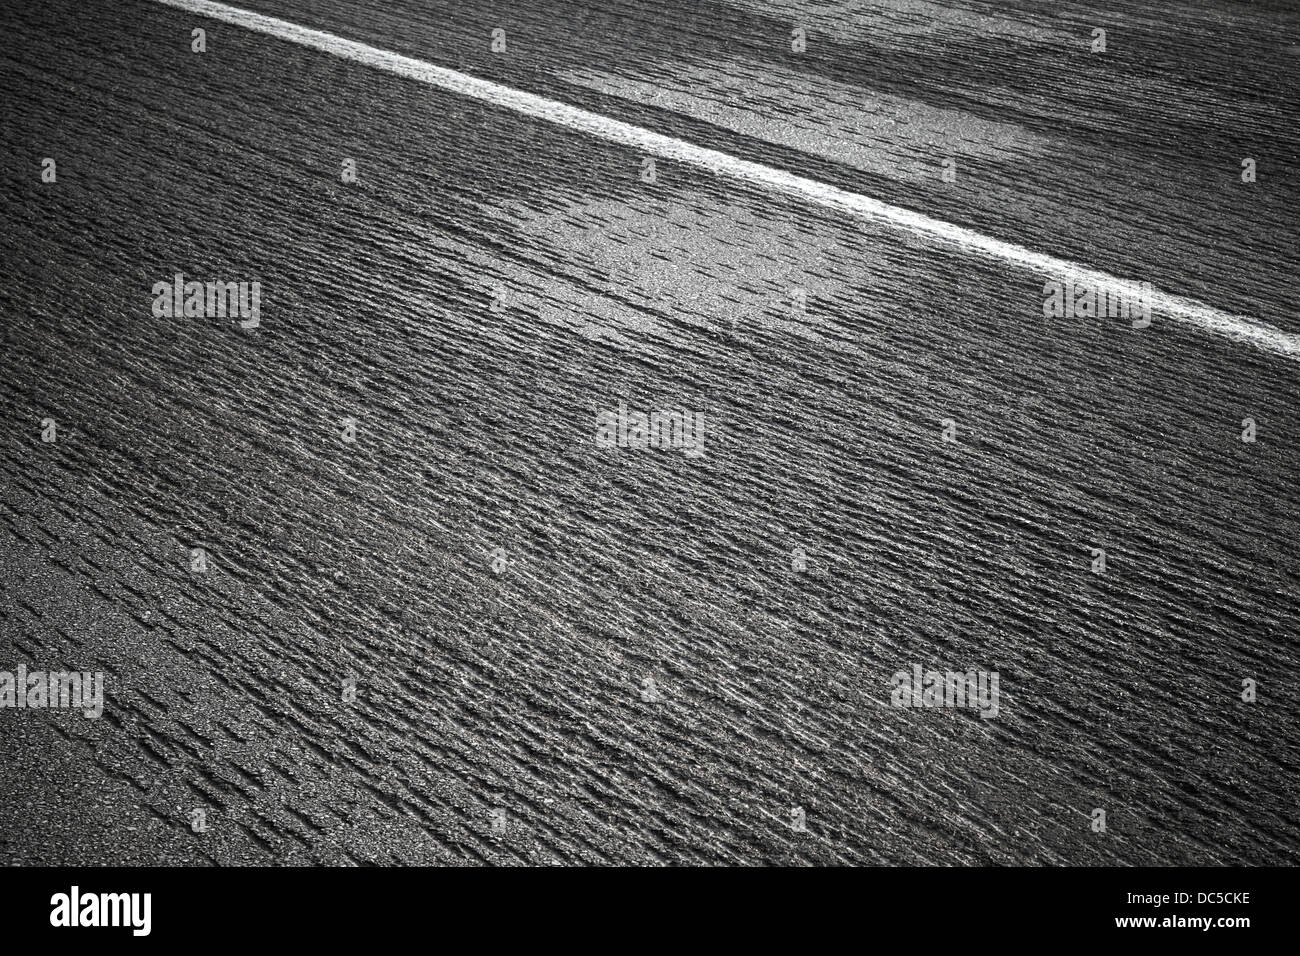 Relief asphalt road with white line marking Stock Photo